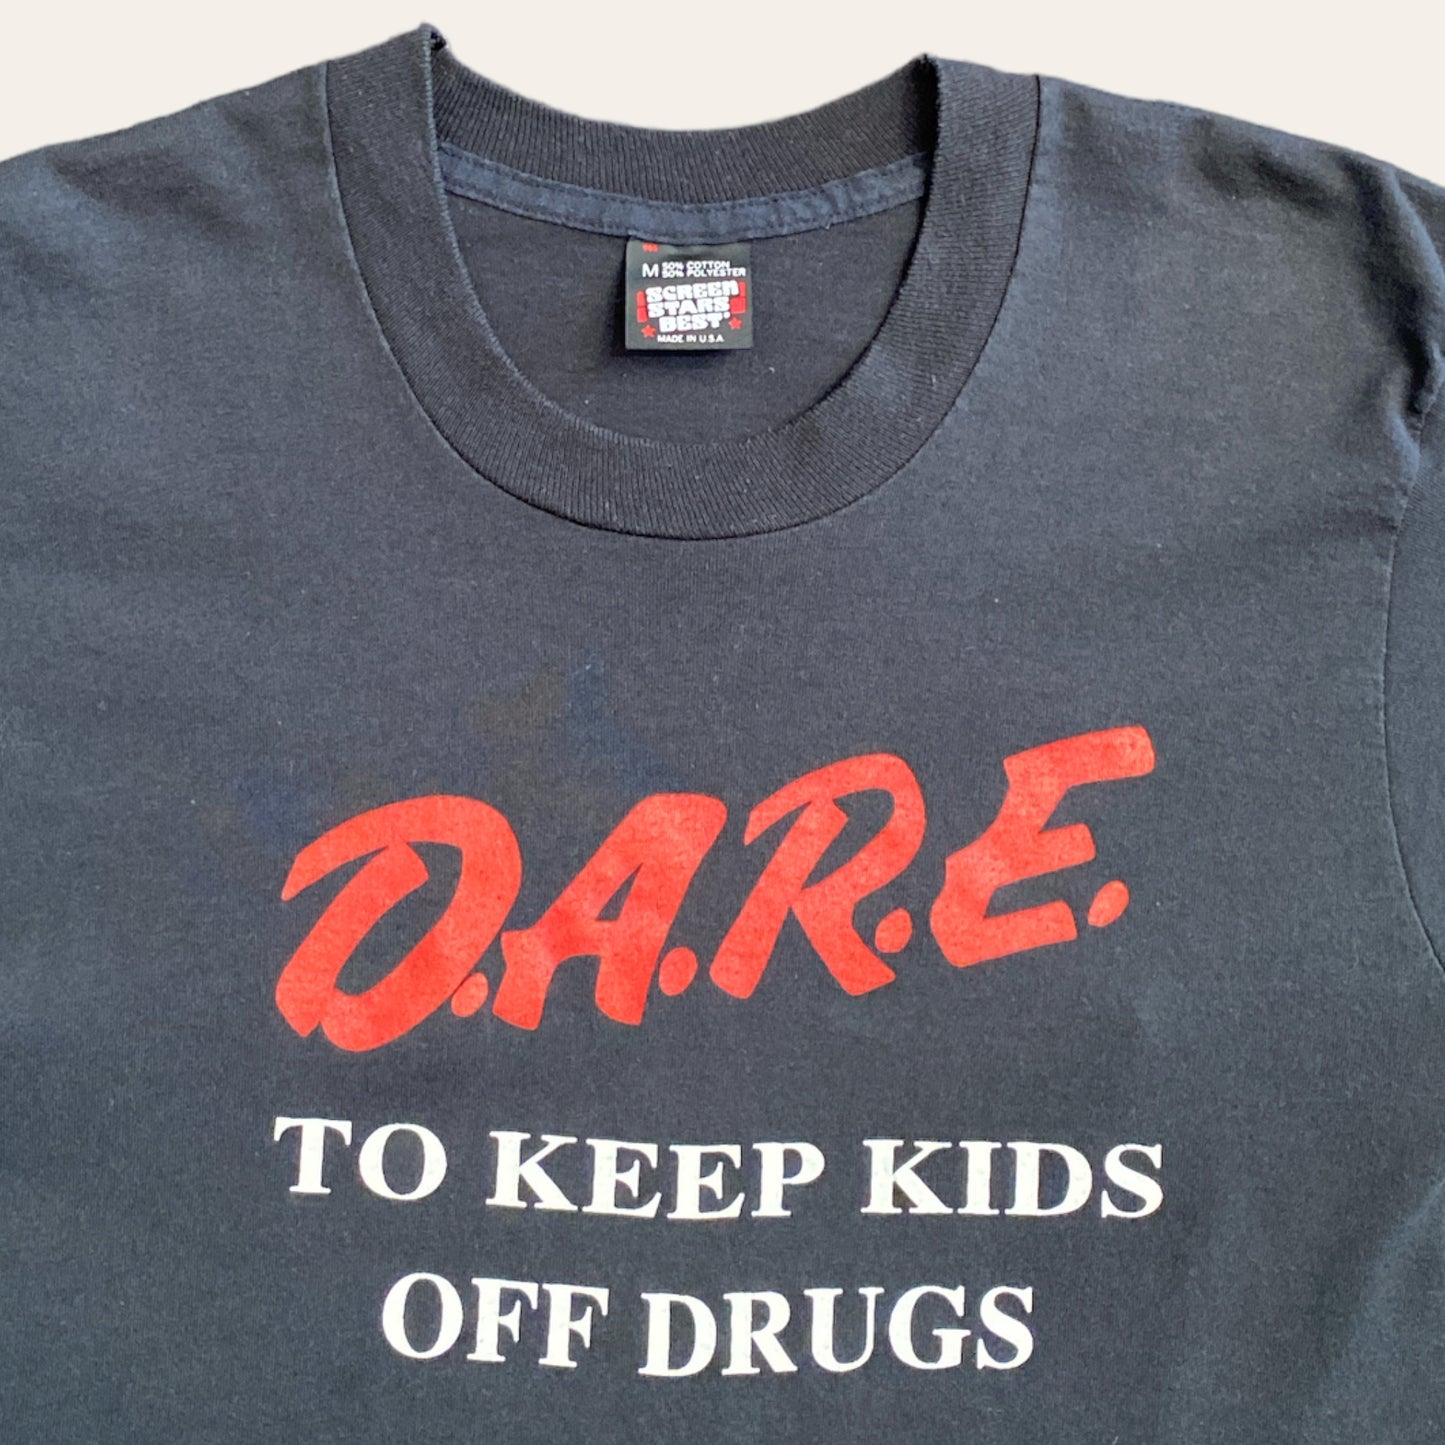 DARE 'To Keep Kids Off Drugs' Tee Size M